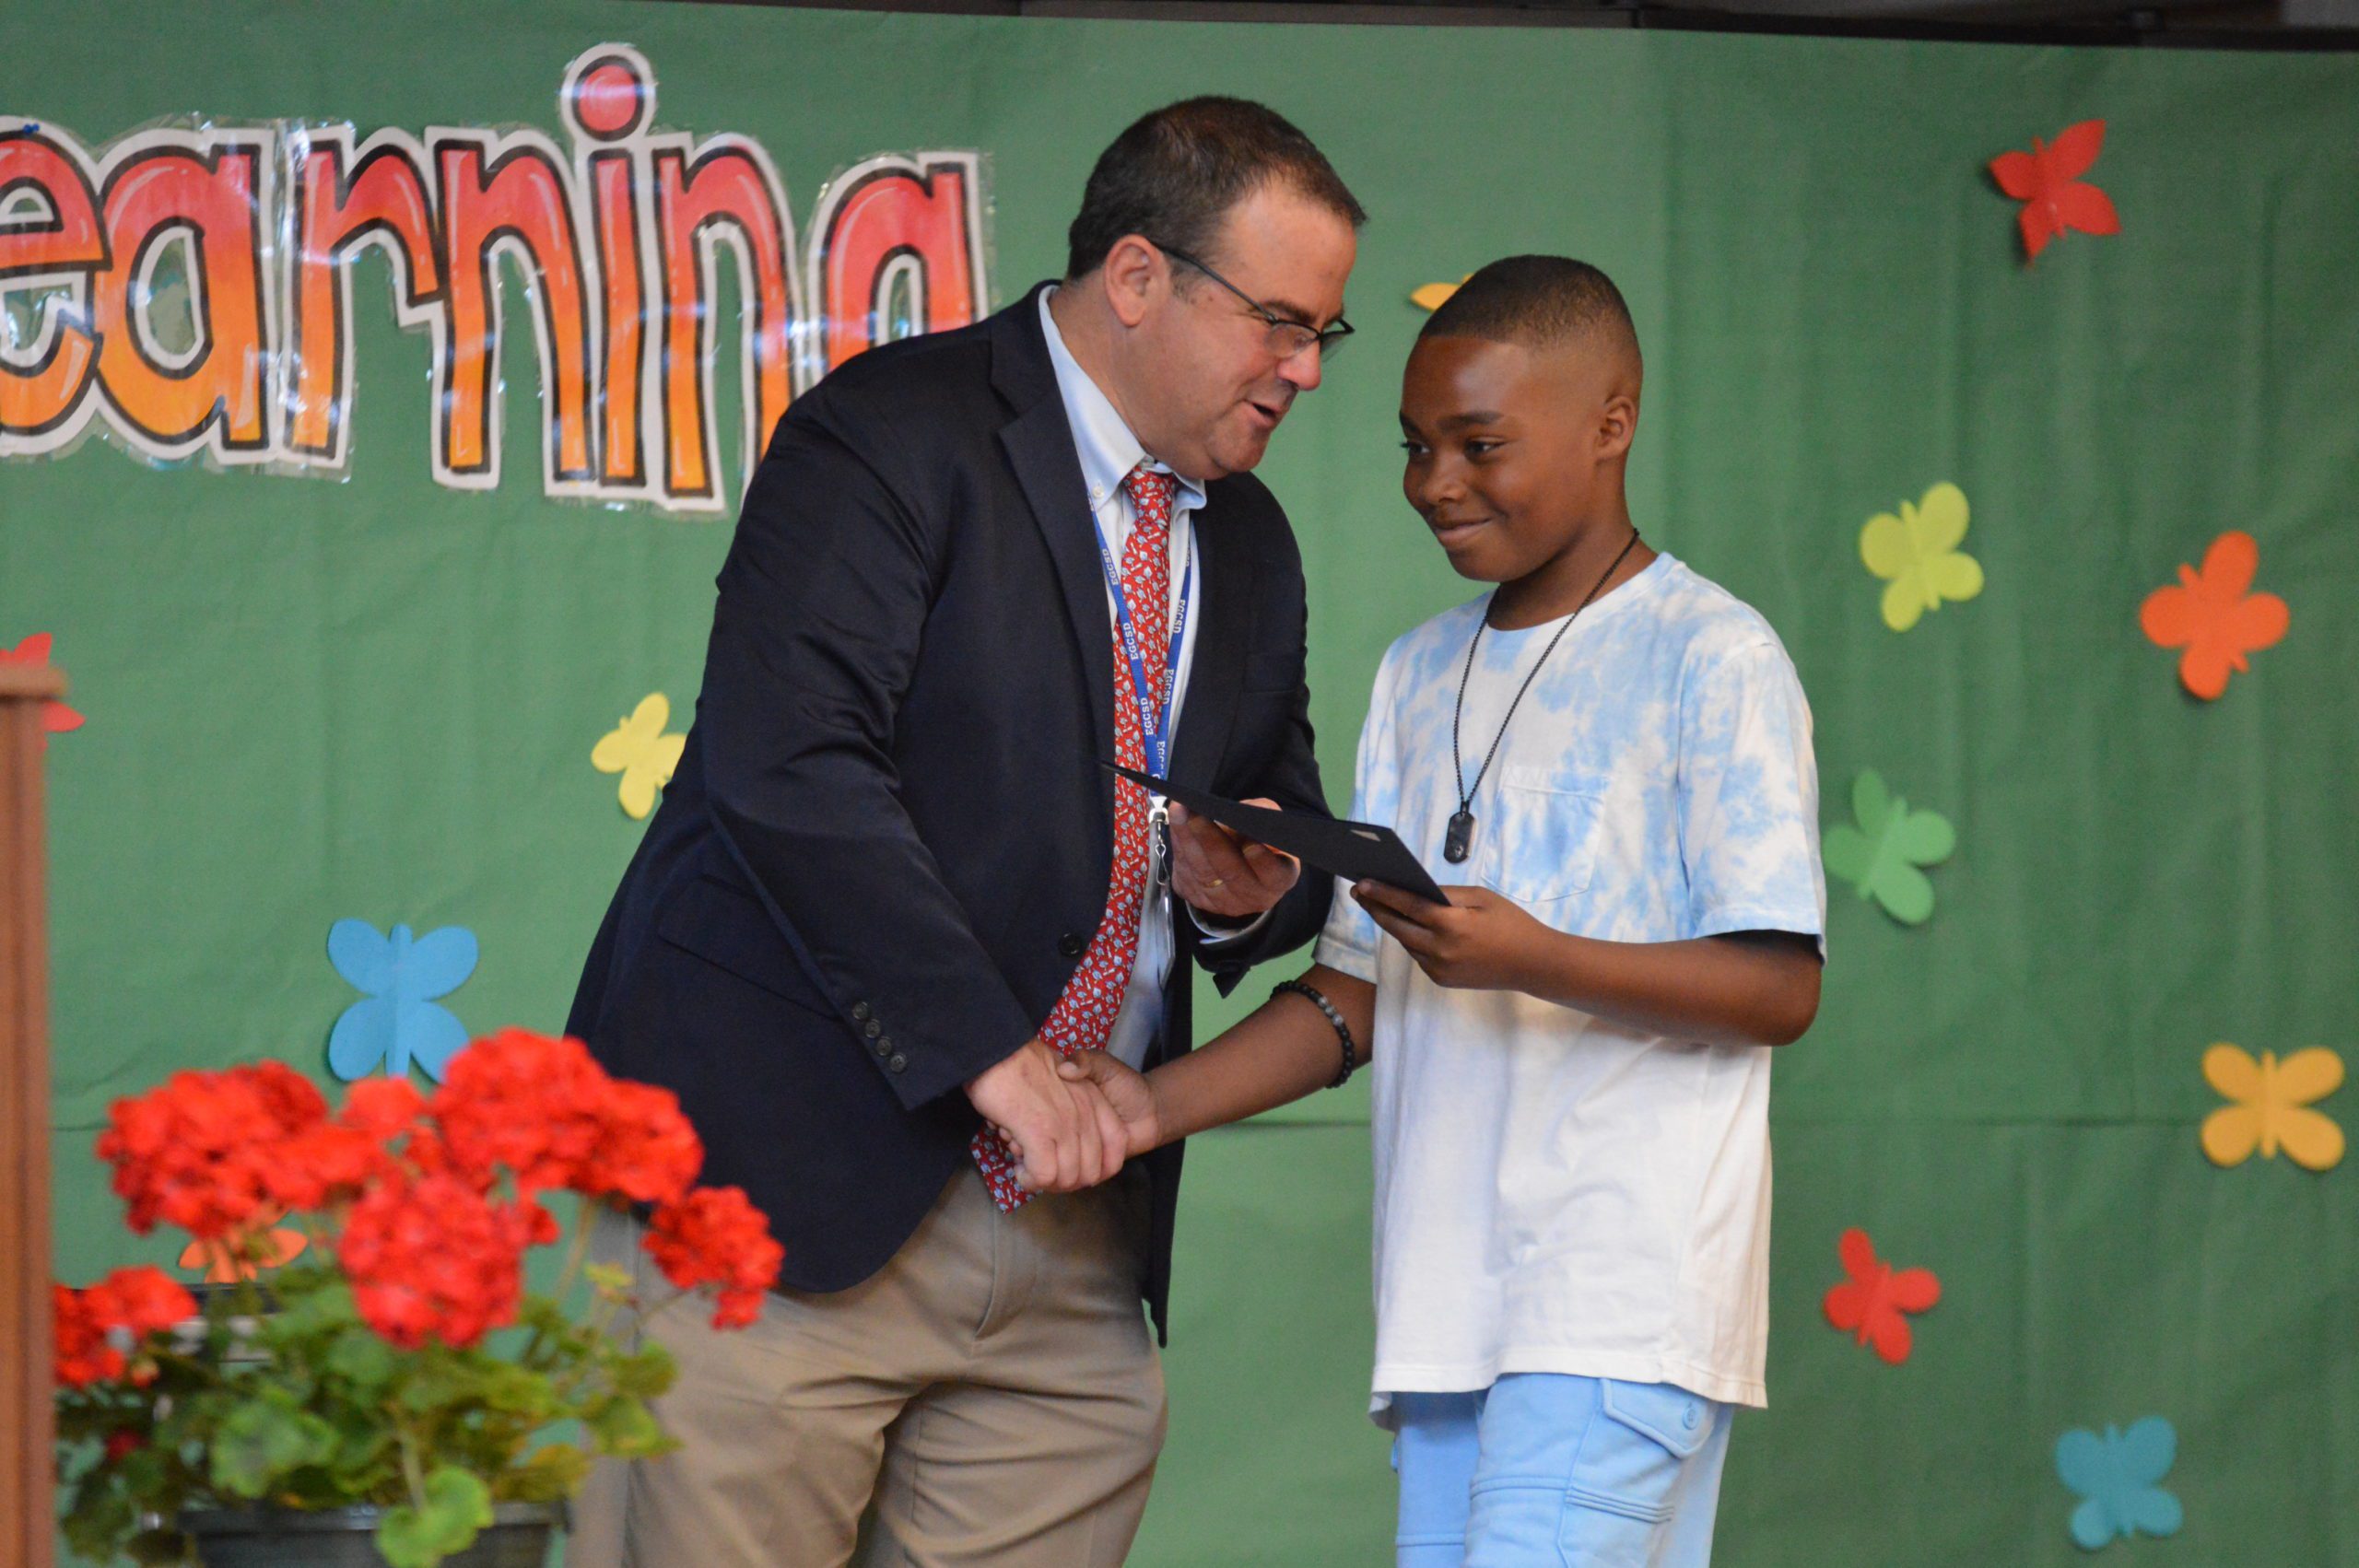 A Green Meadow student receives their certificate.